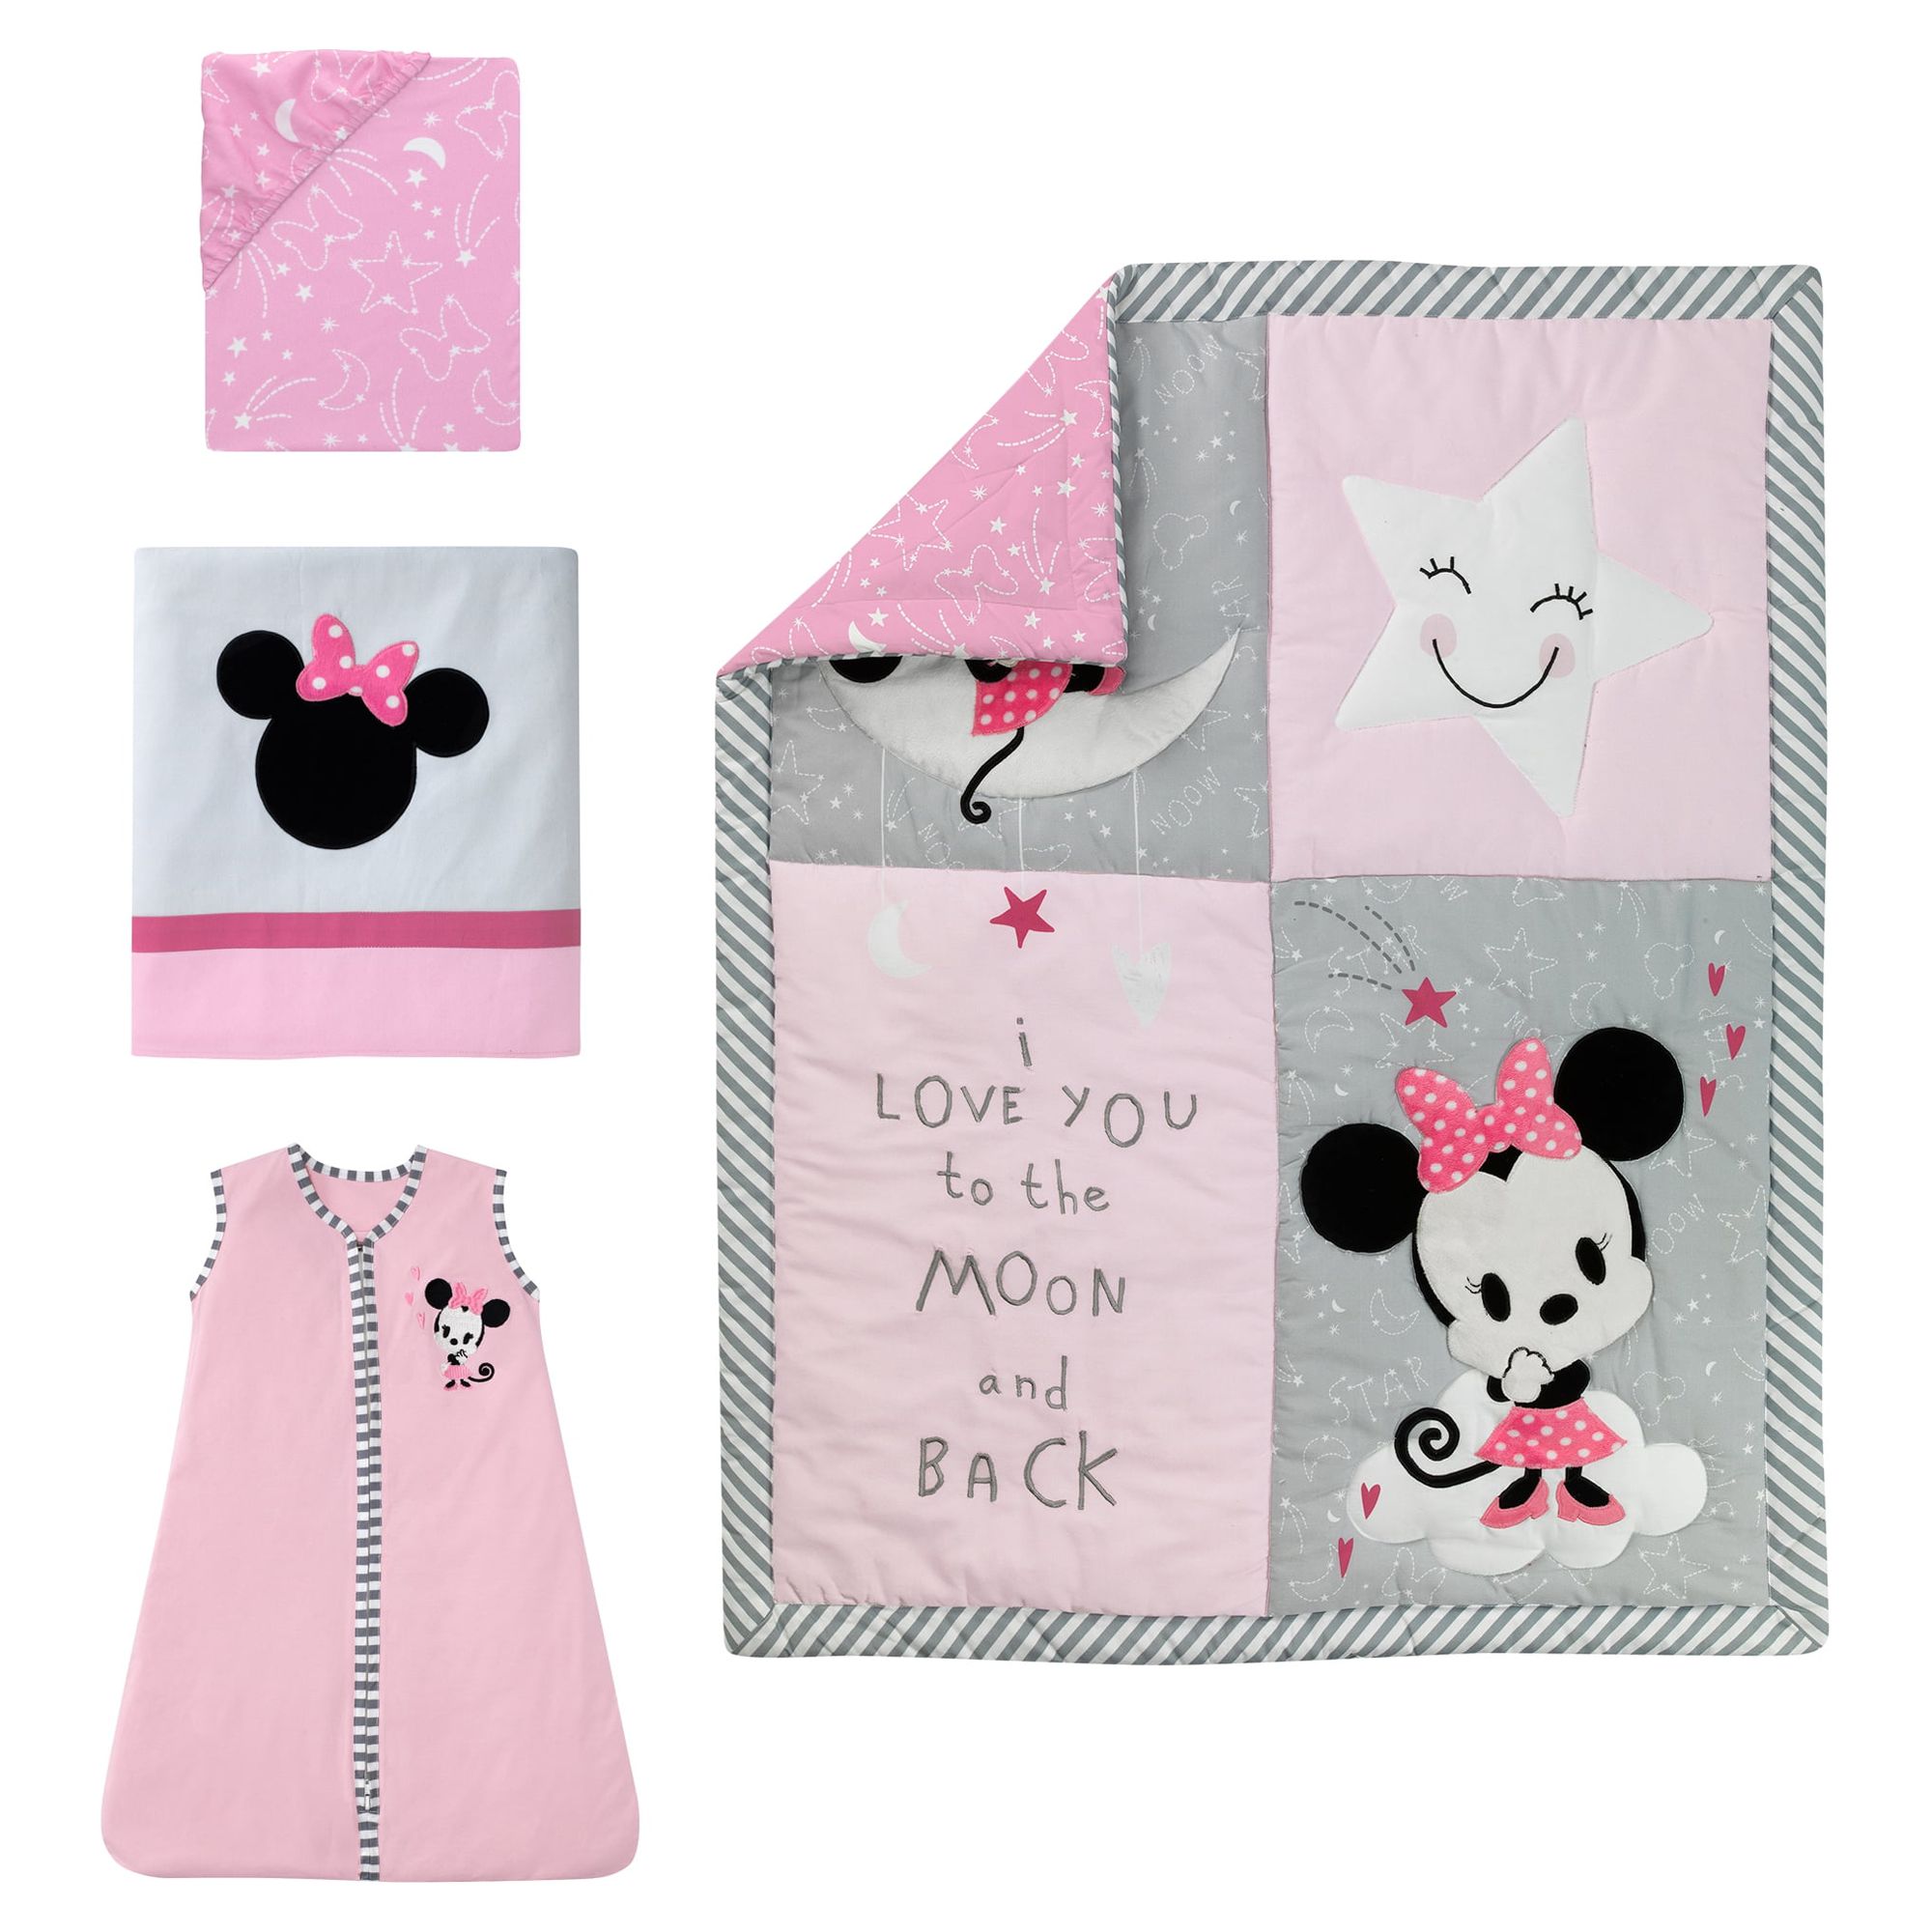 Disney Baby Minnie Mouse Pink 4-Piece Nursery Crib Bedding Set by Lambs & Ivy - image 2 of 8